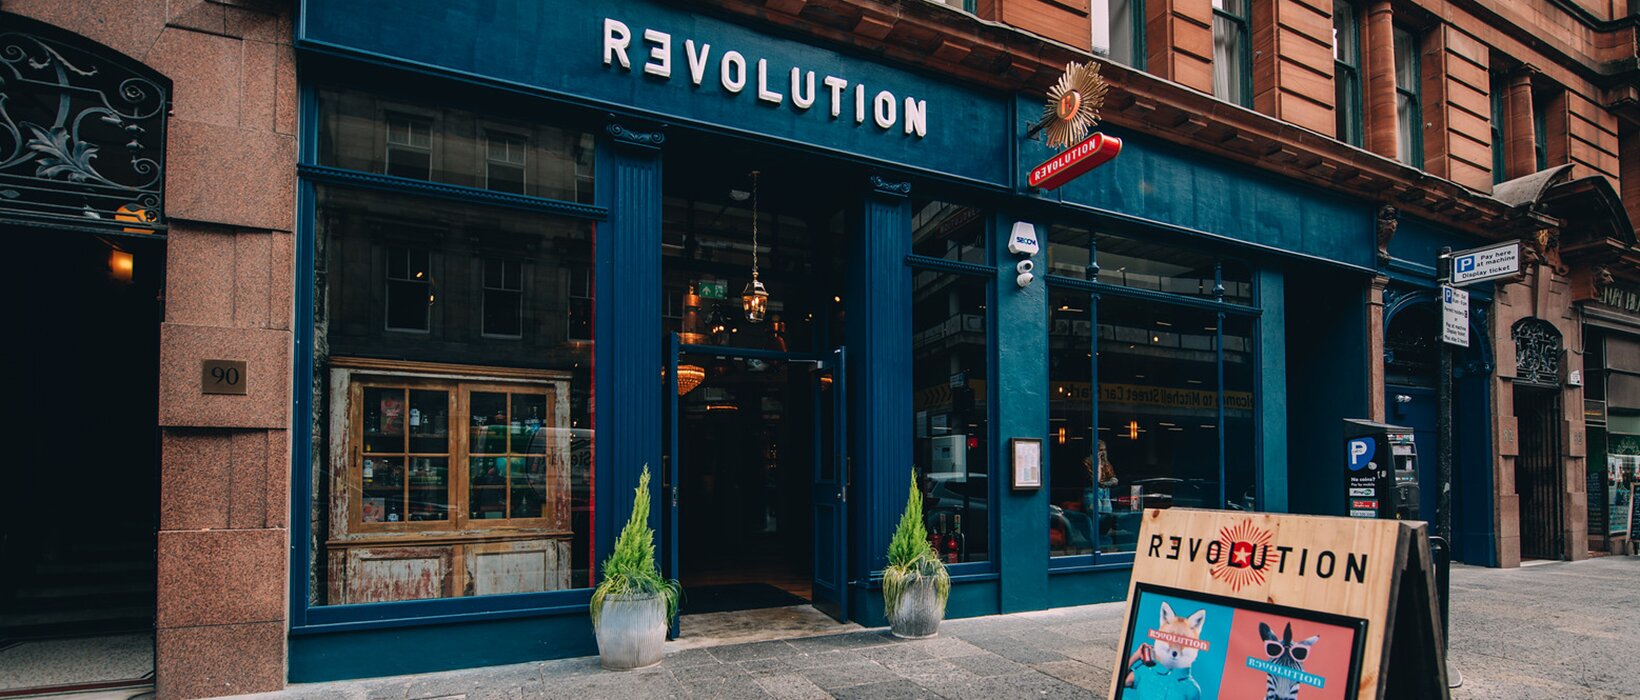 Revolution Bars to close 18 sites under proposed restructuring plans